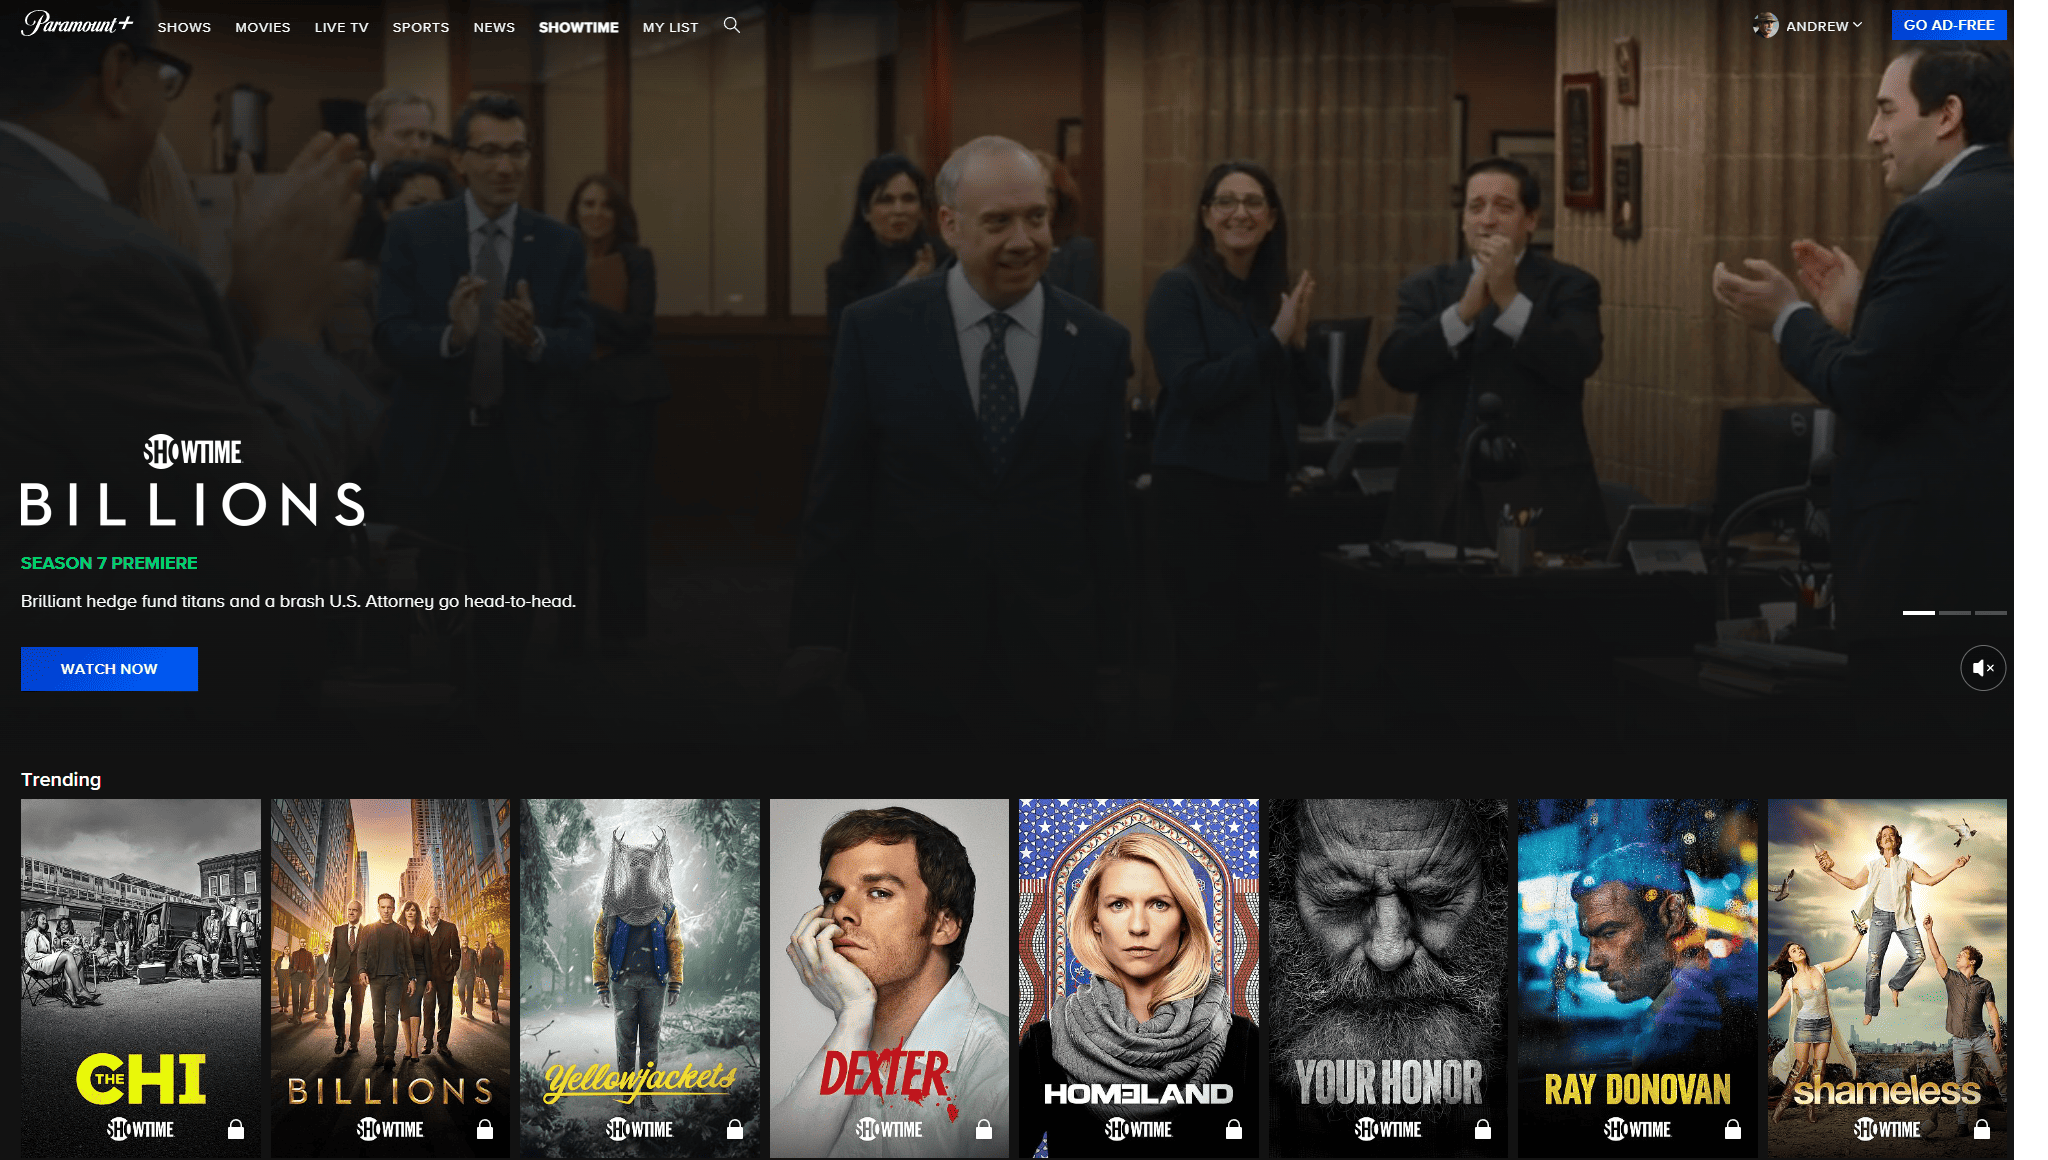 Screenshot of “Billions” title card in the “Showtime” app of the Paramount+ web app